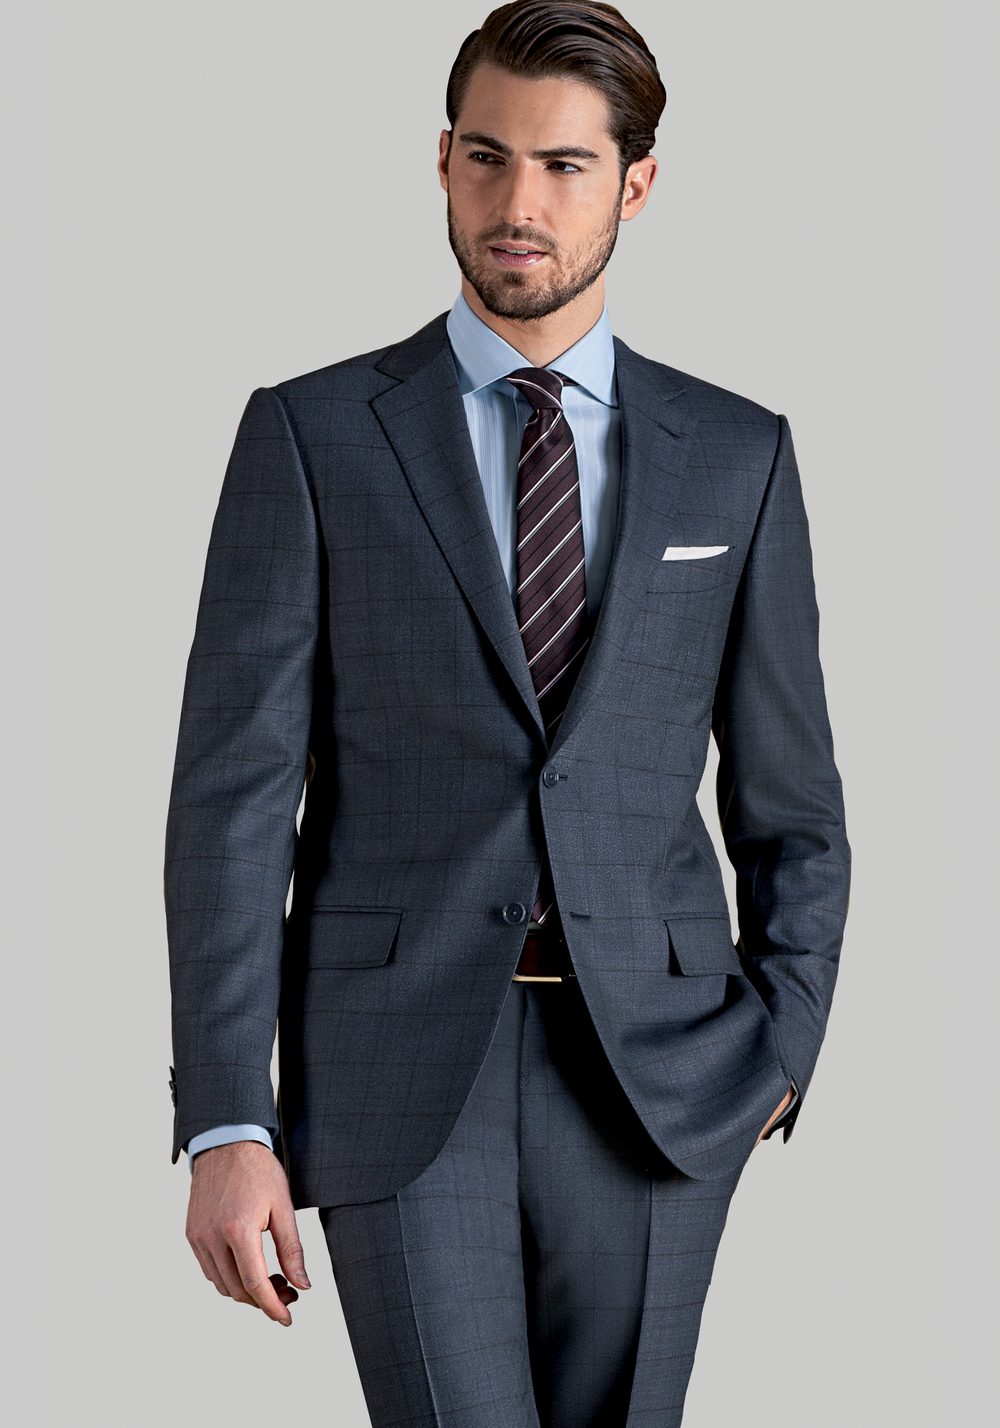 Custom Suits by Label New York - Label Custom Clothing